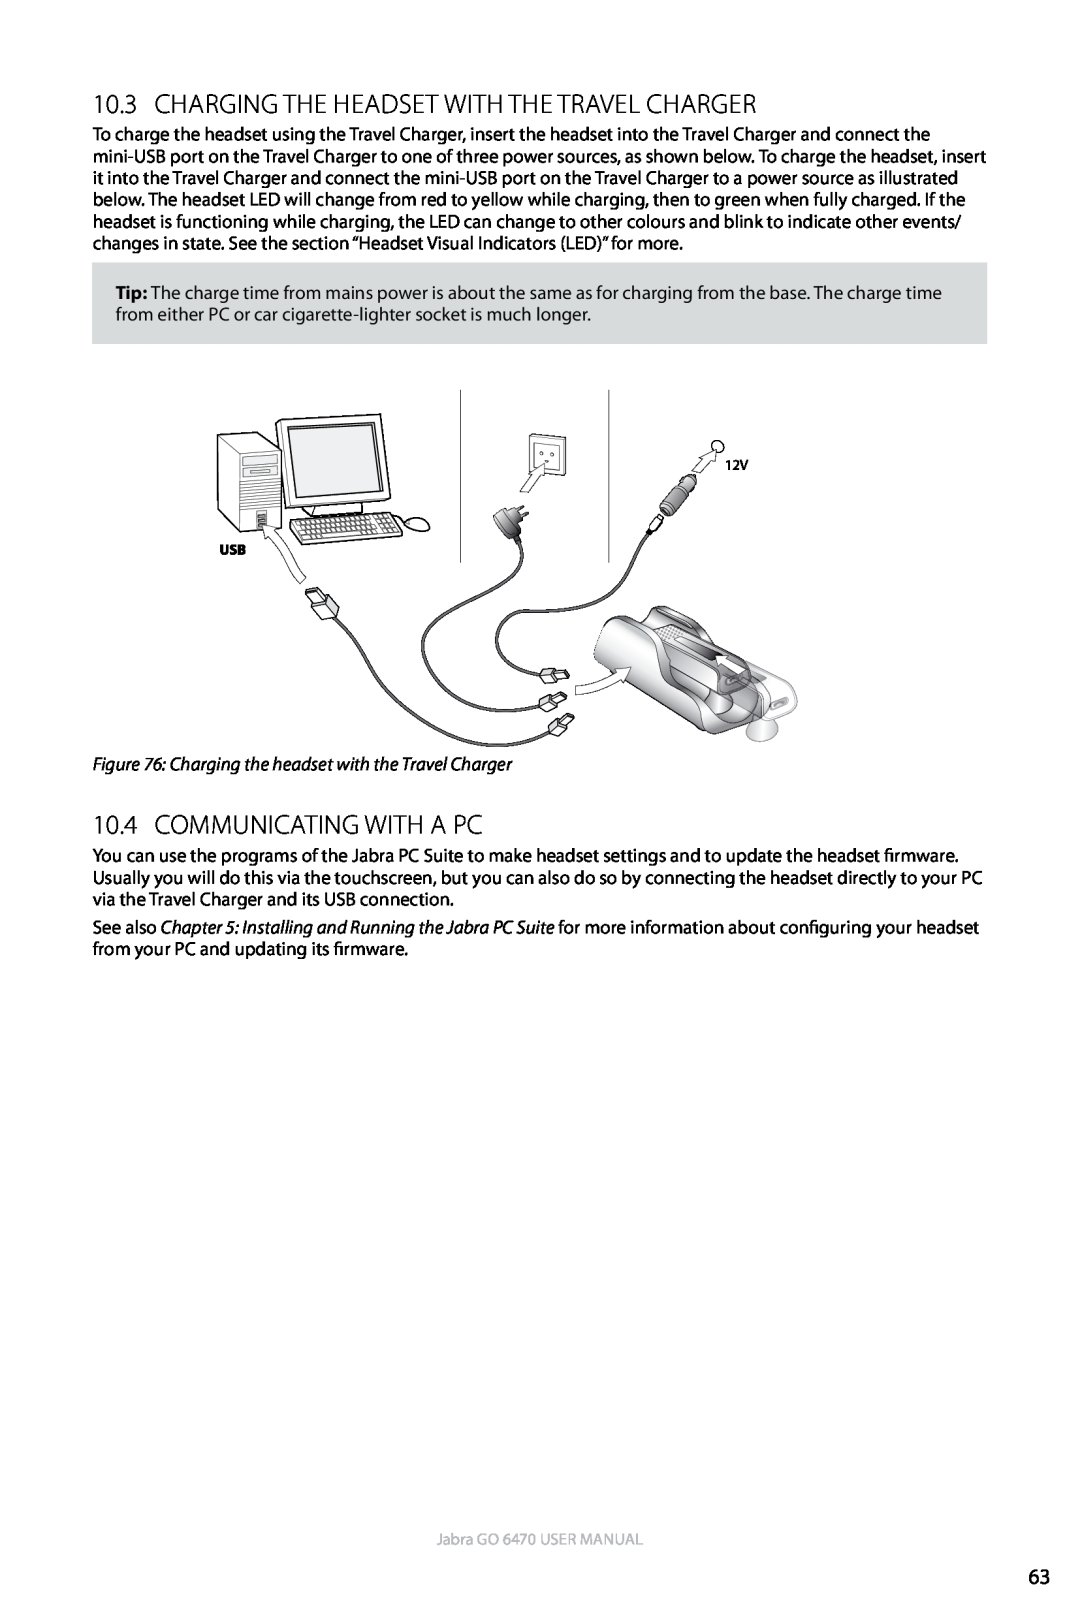 Jabra GO 6470 user manual Charging the Headset with the Travel Charger, Communicating with a PC 